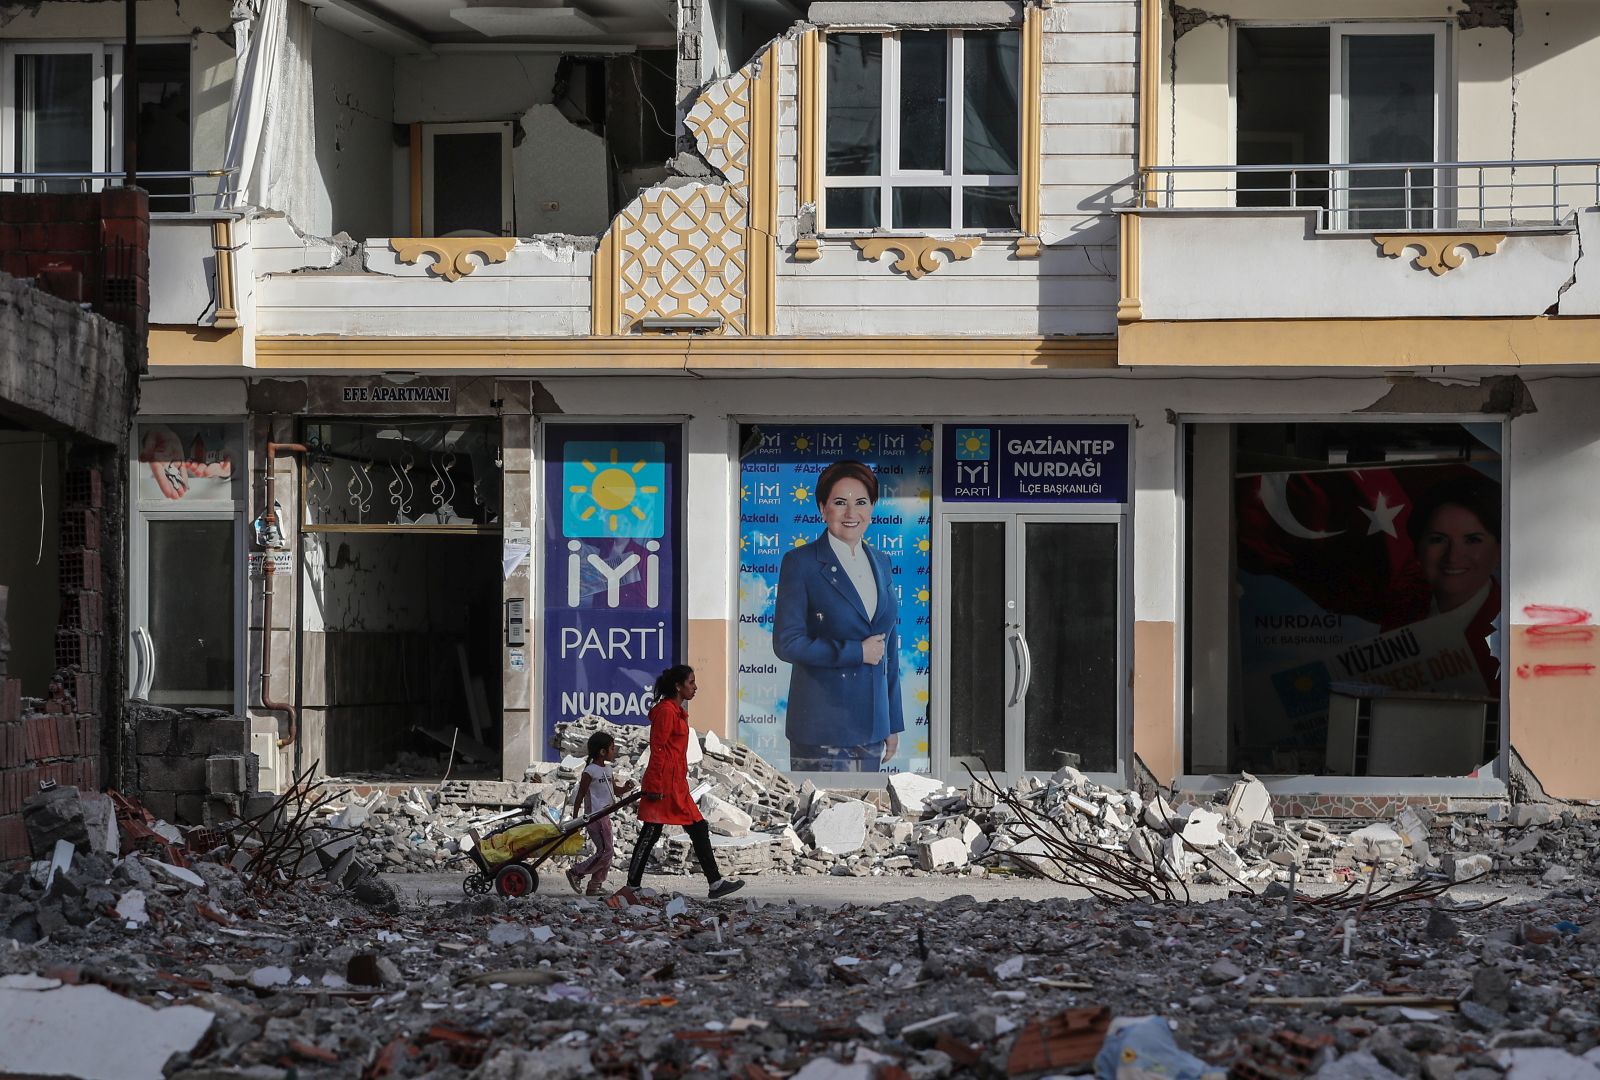 epa10610834 People walk in front of a picture of Turkish oppoisiton IYI Parti party leader Meral Aksener in Nurdagi district of Gaziantep, Turkey, 05 May 2023. More than 50,000 people died and thousands more were injured after major earthquakes struck southern Turkey and northern Syria on 06 February and again on 20 February 2023.  EPA/ERDEM SAHIN